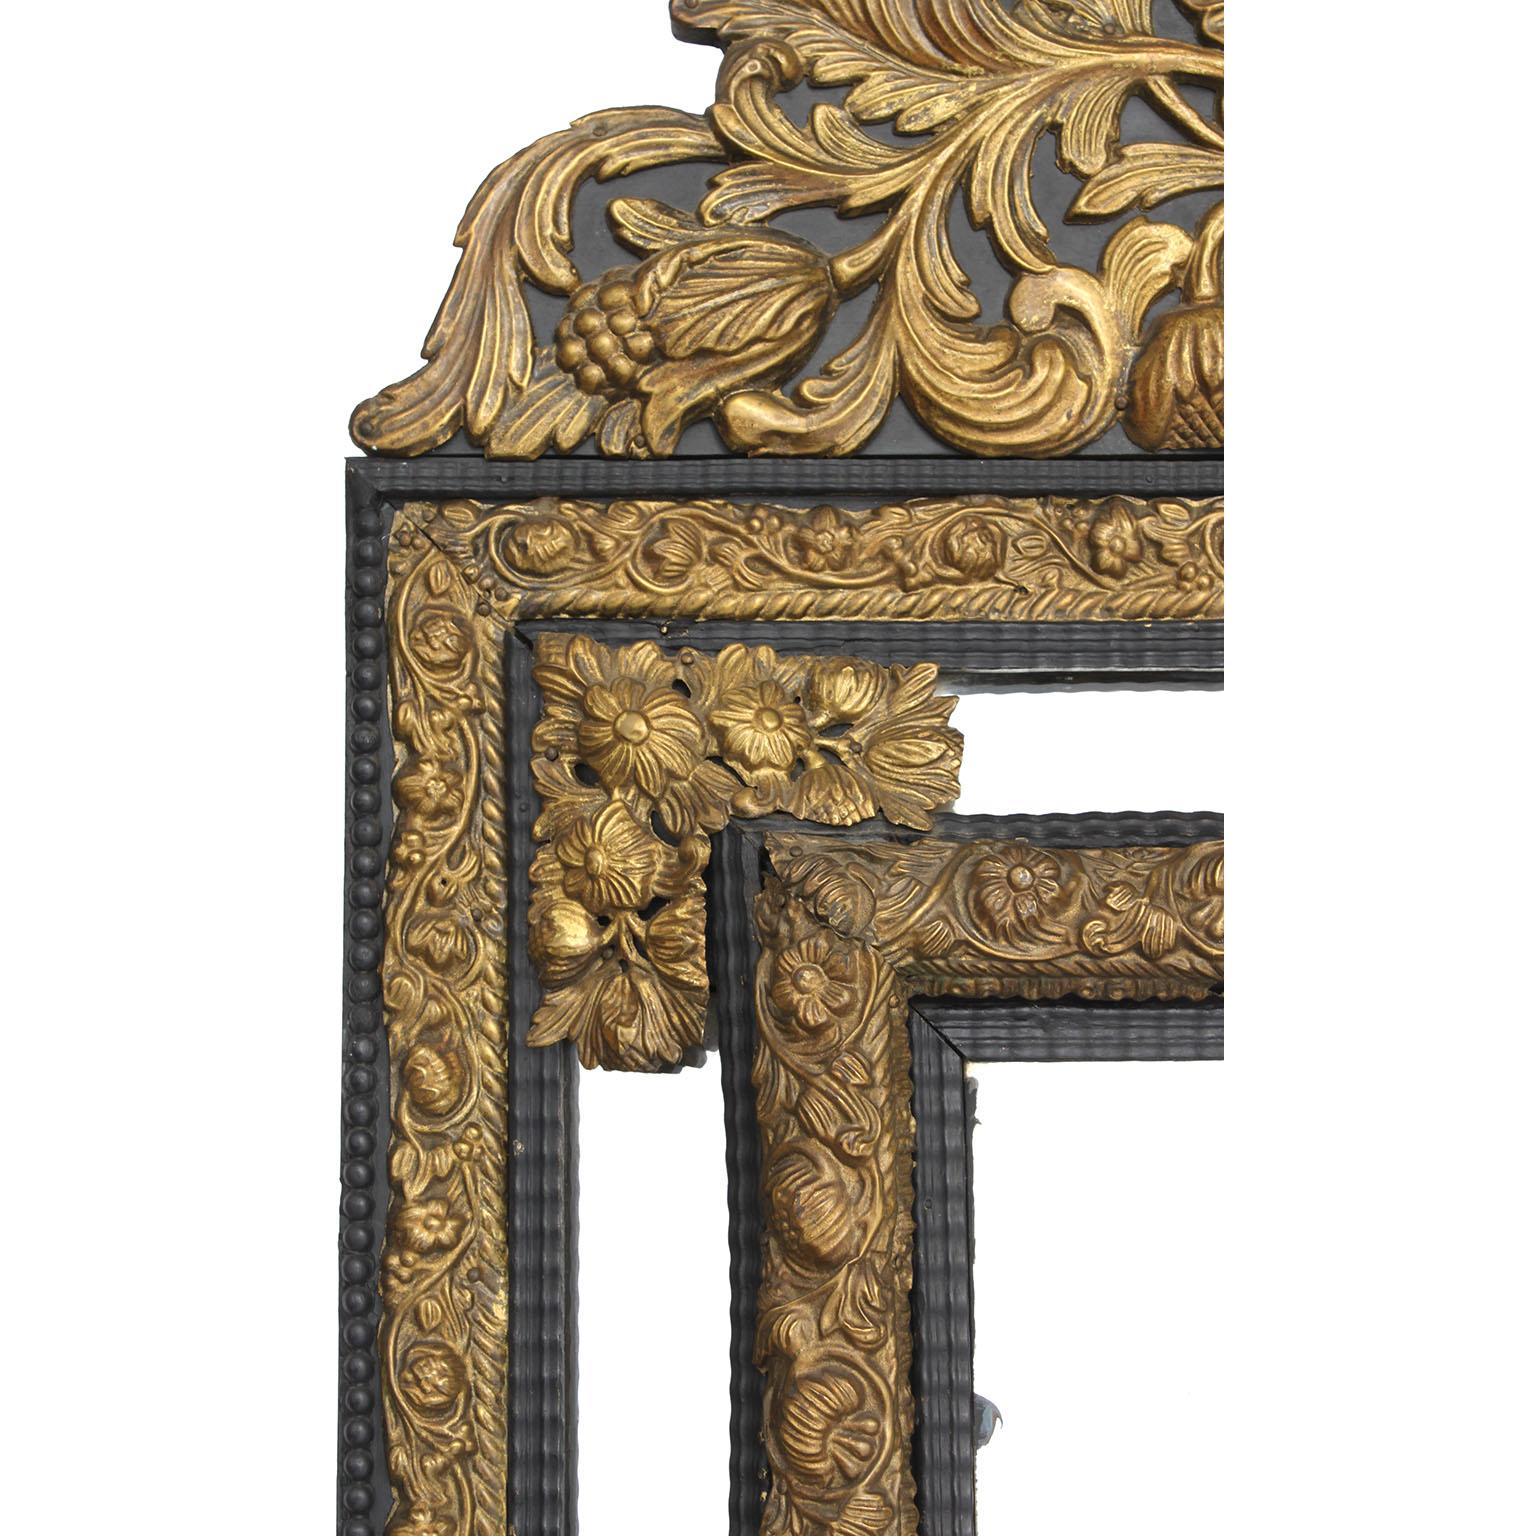 Baroque Revival A French 19th Century Baroque Style Hammered Gilt-Brass Repoussé Mirror Frame For Sale